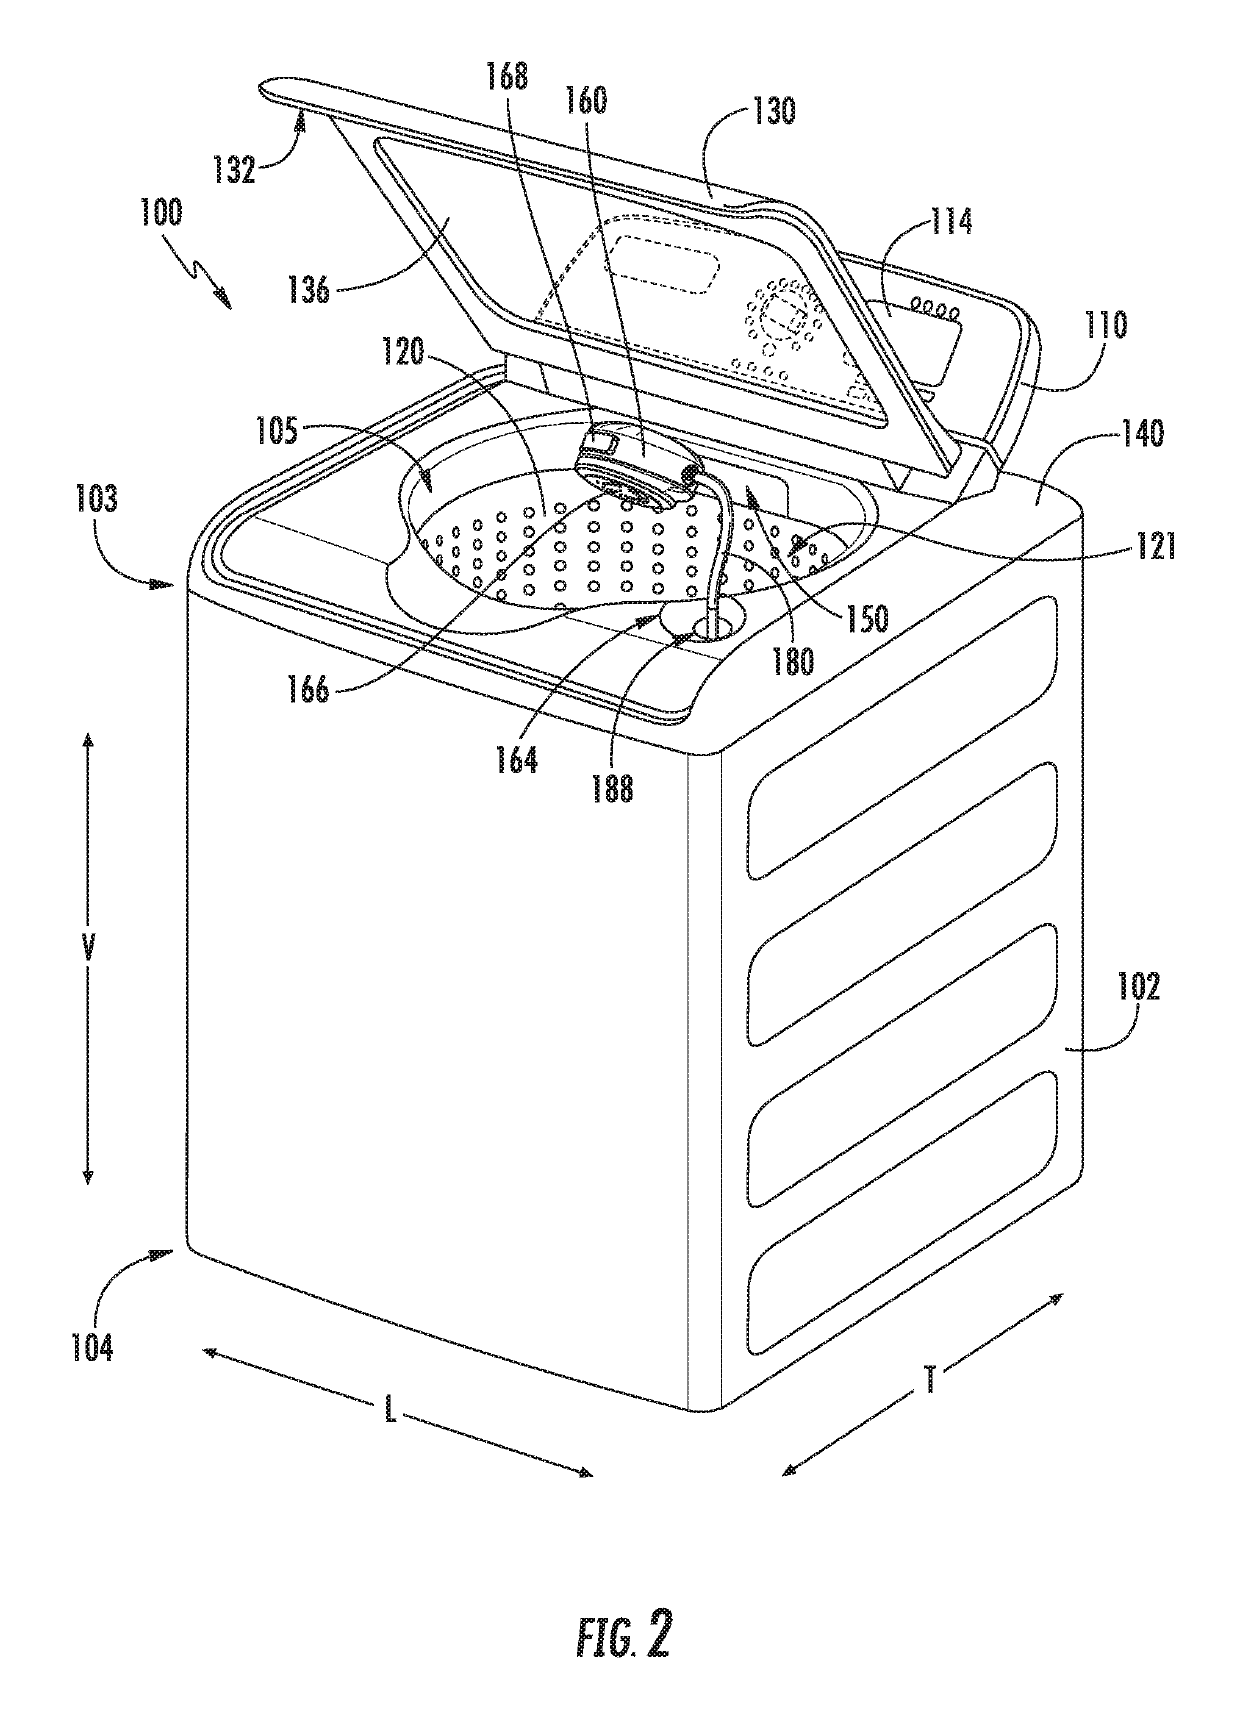 Passive diverter for an auxiliary spray device of a washing machine appliance